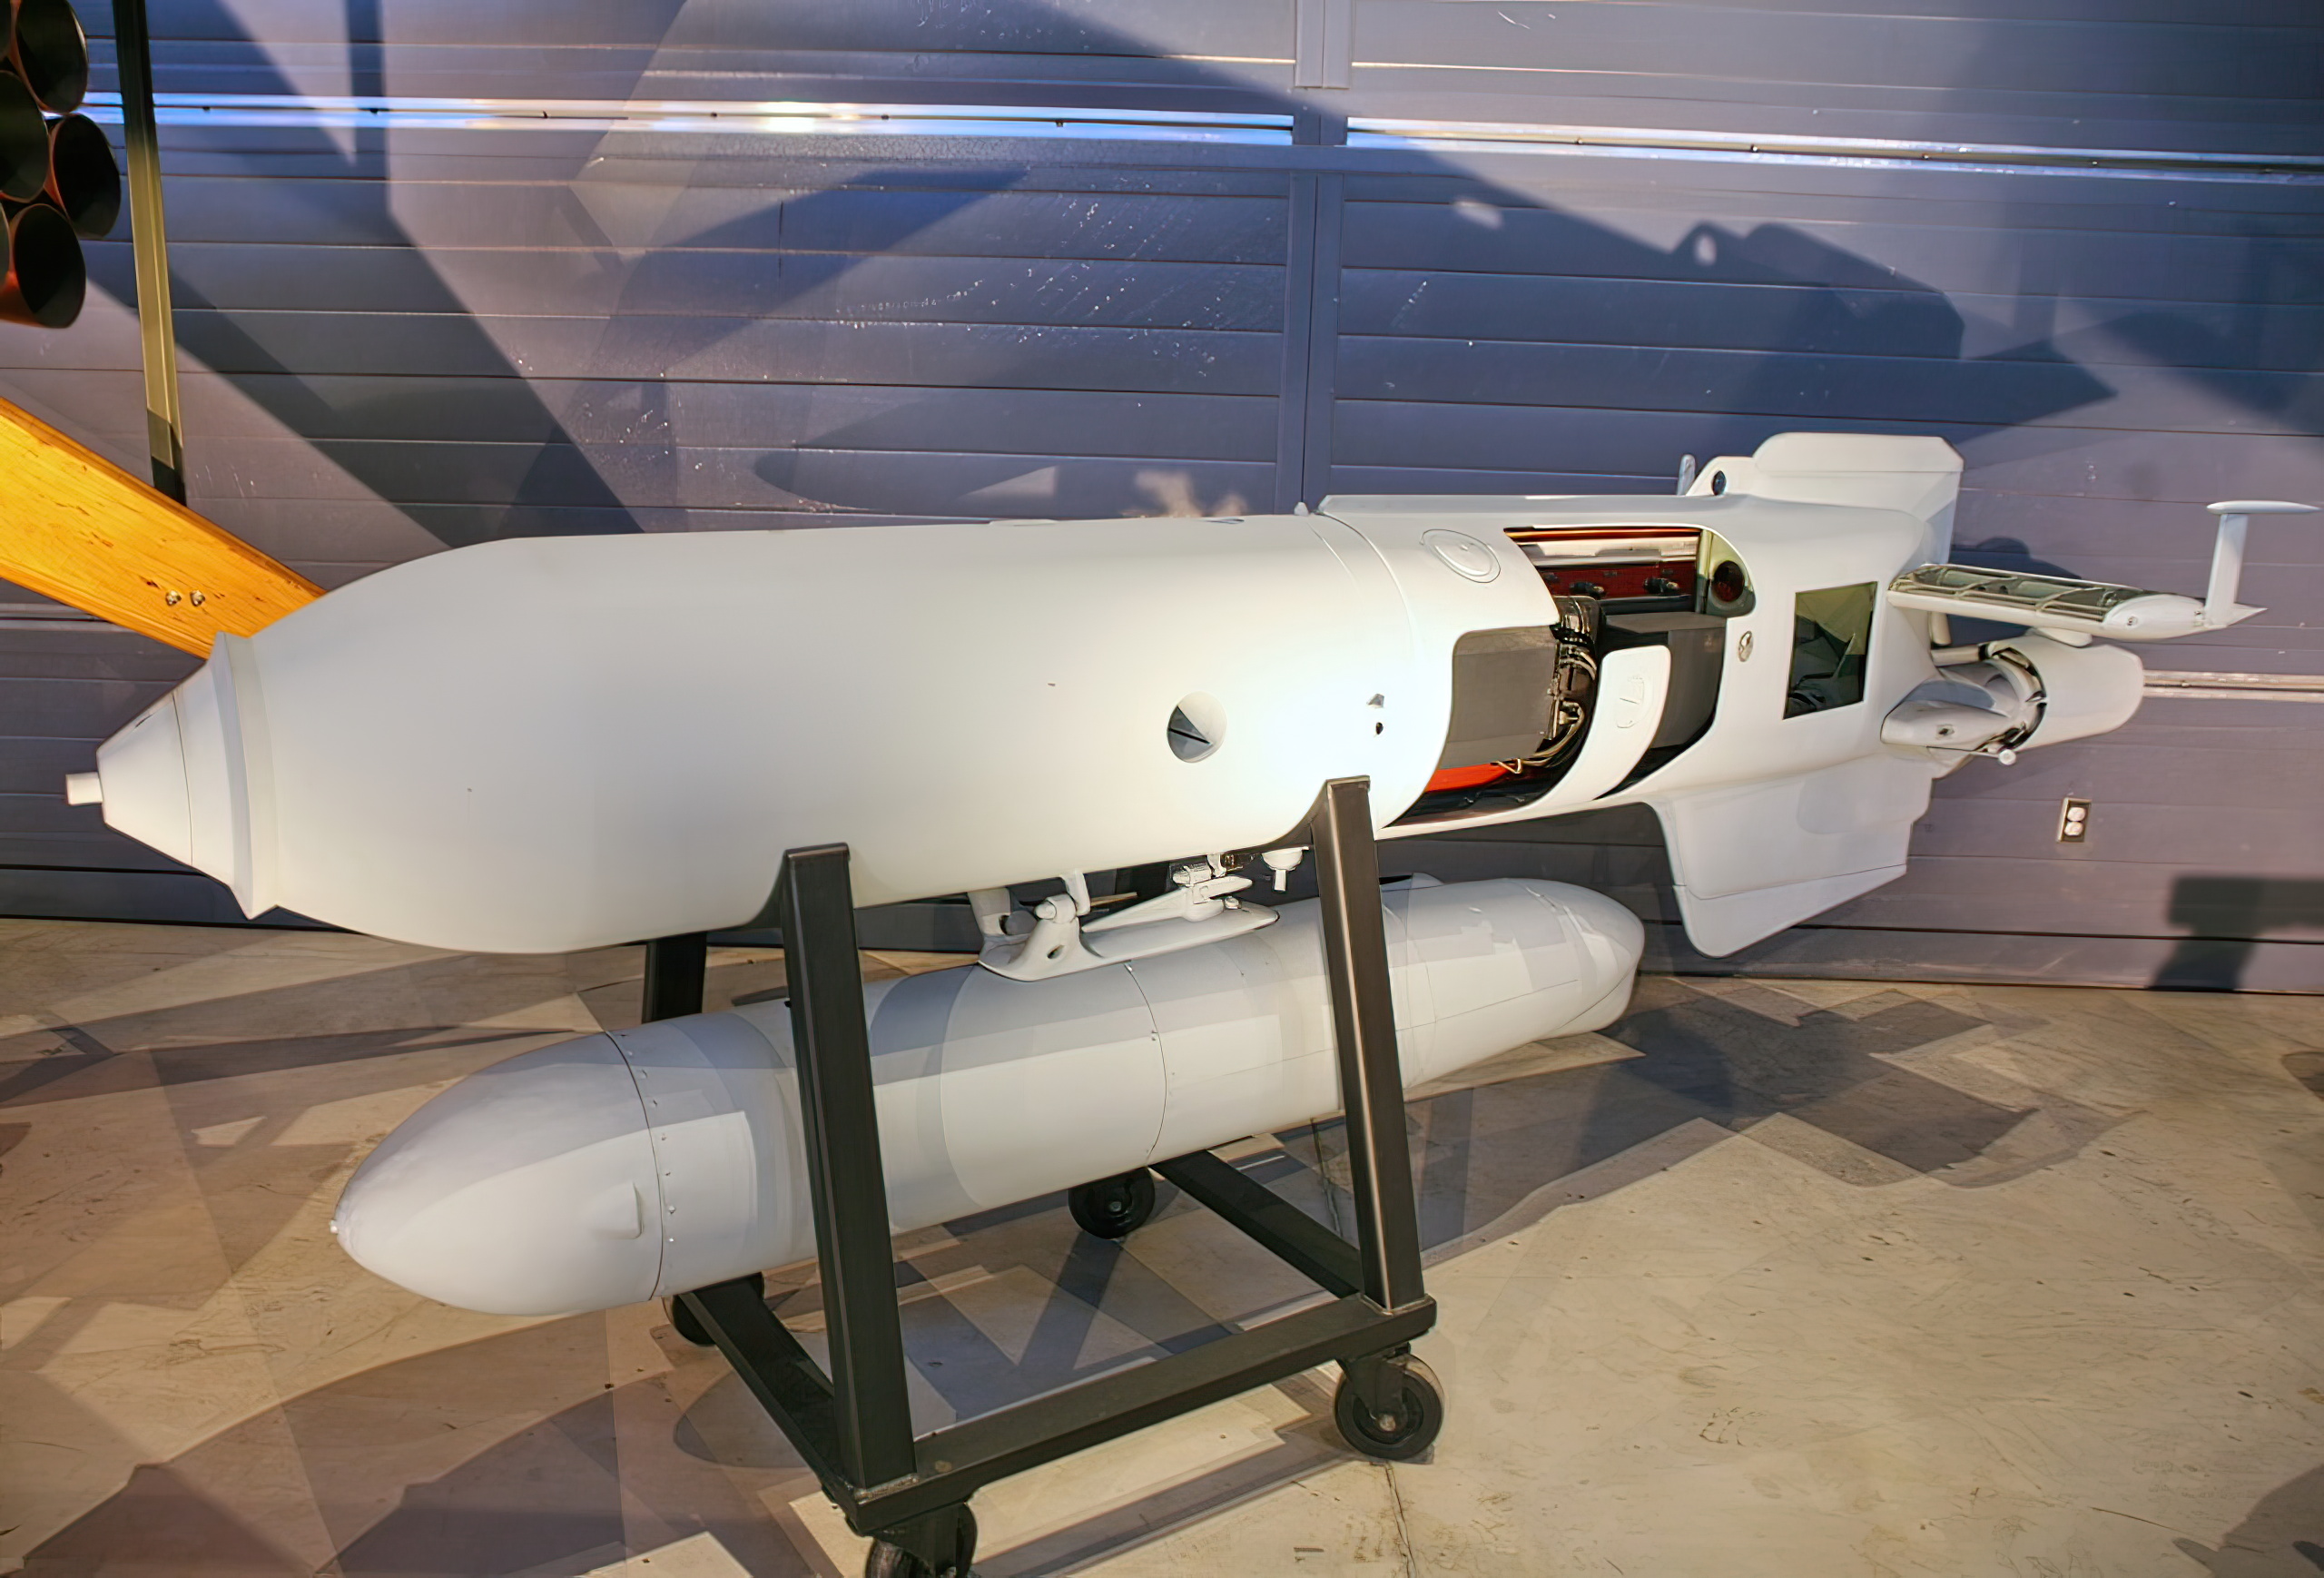 Hs 293 air-launched missile